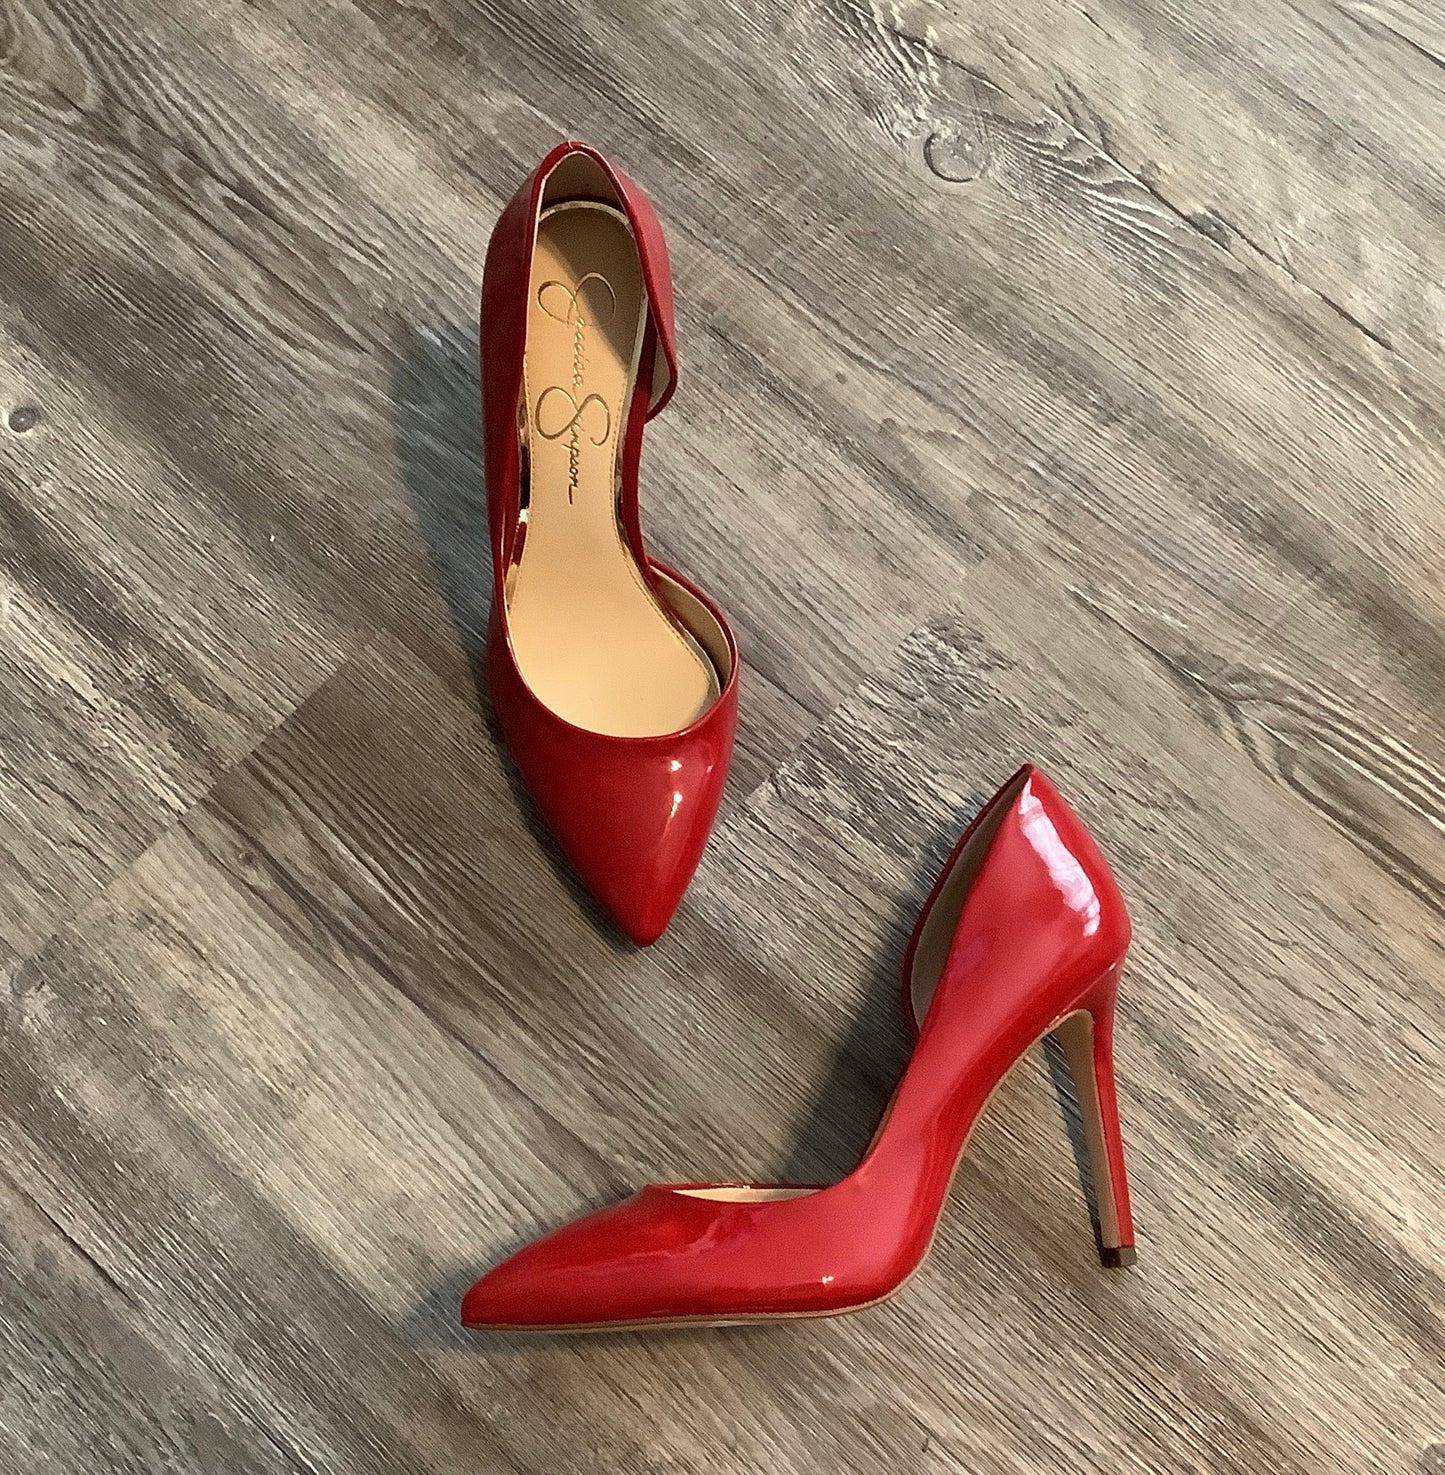 Shoes Heels Stiletto By Jessica Simpson  Size: 8